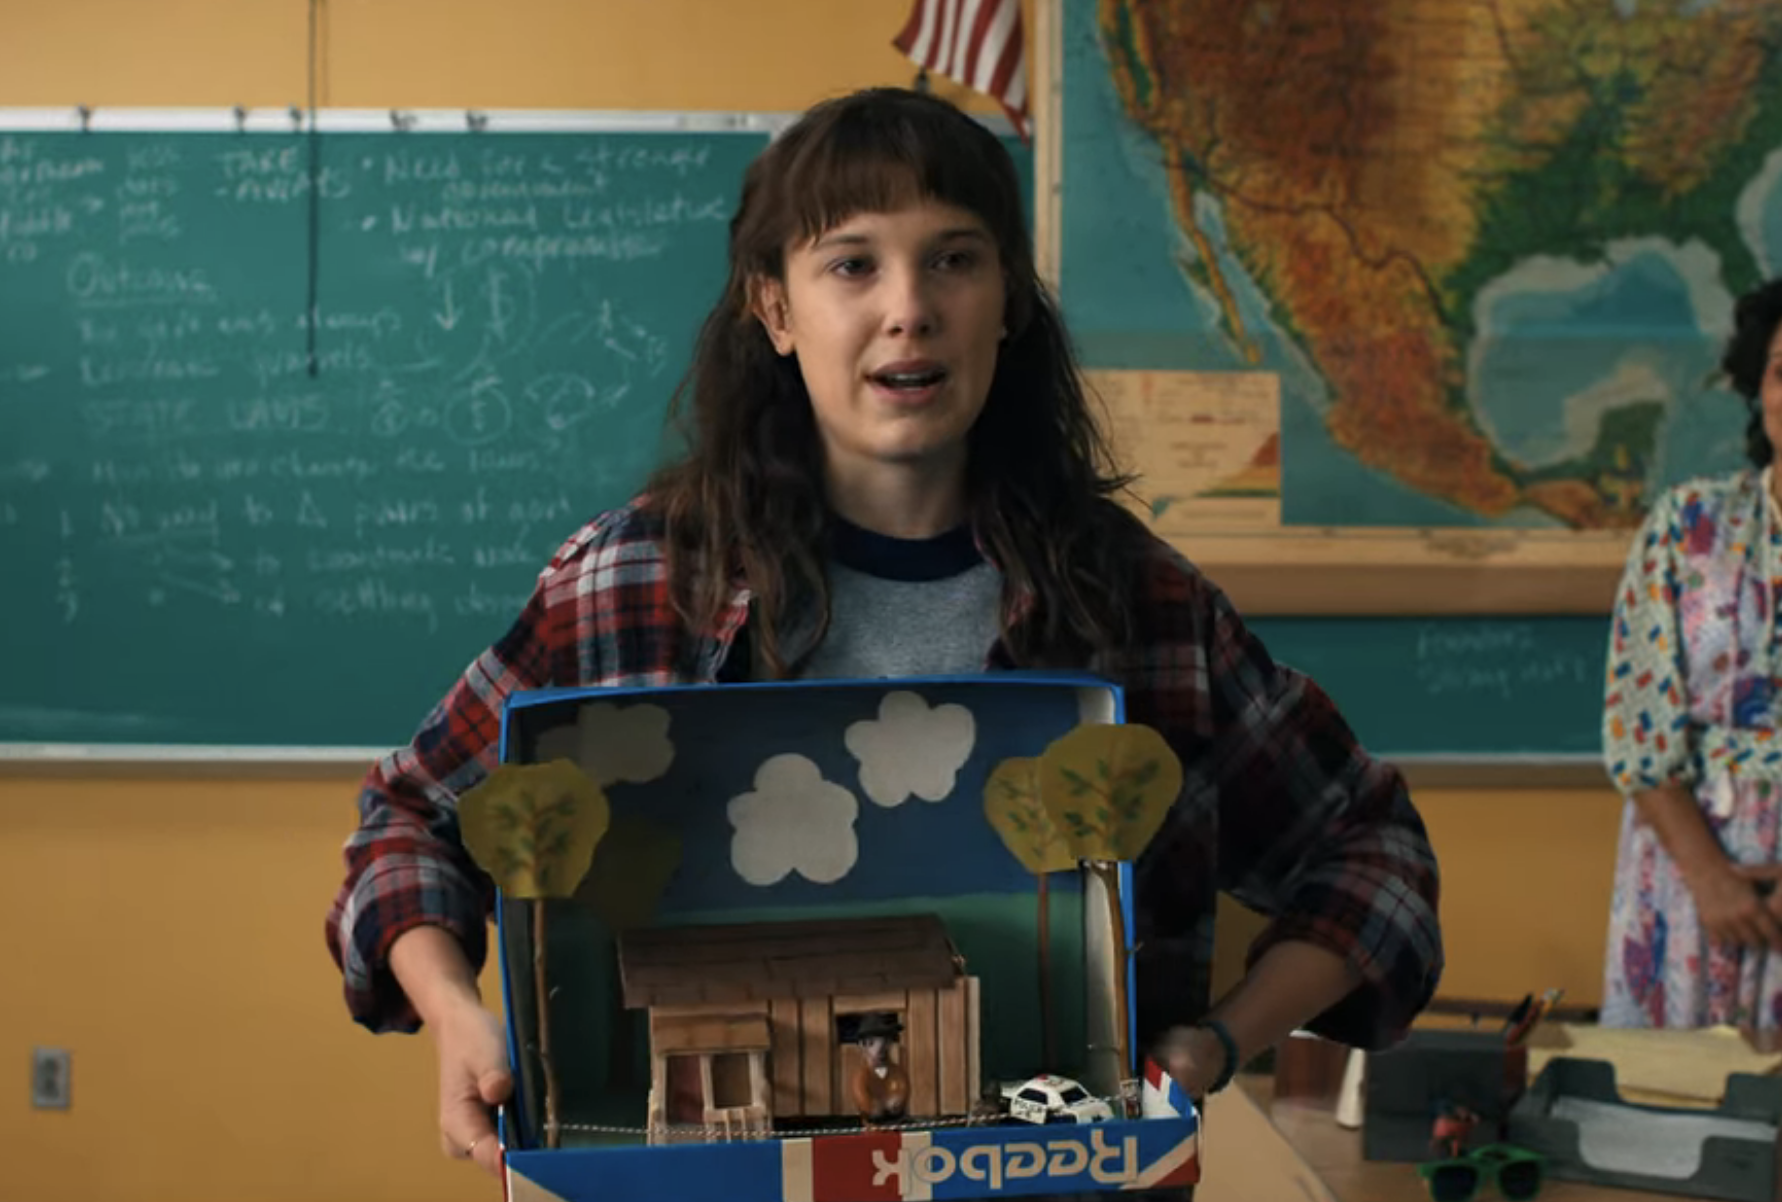 Eleven stands in front of the class holding a diorama